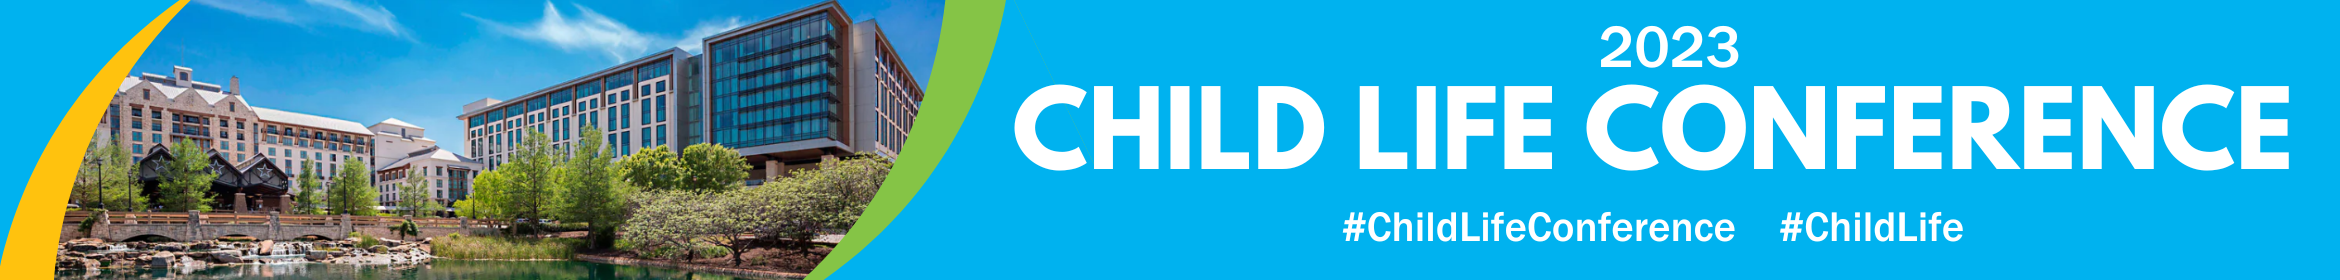 2023 Child Life Conference Main banner